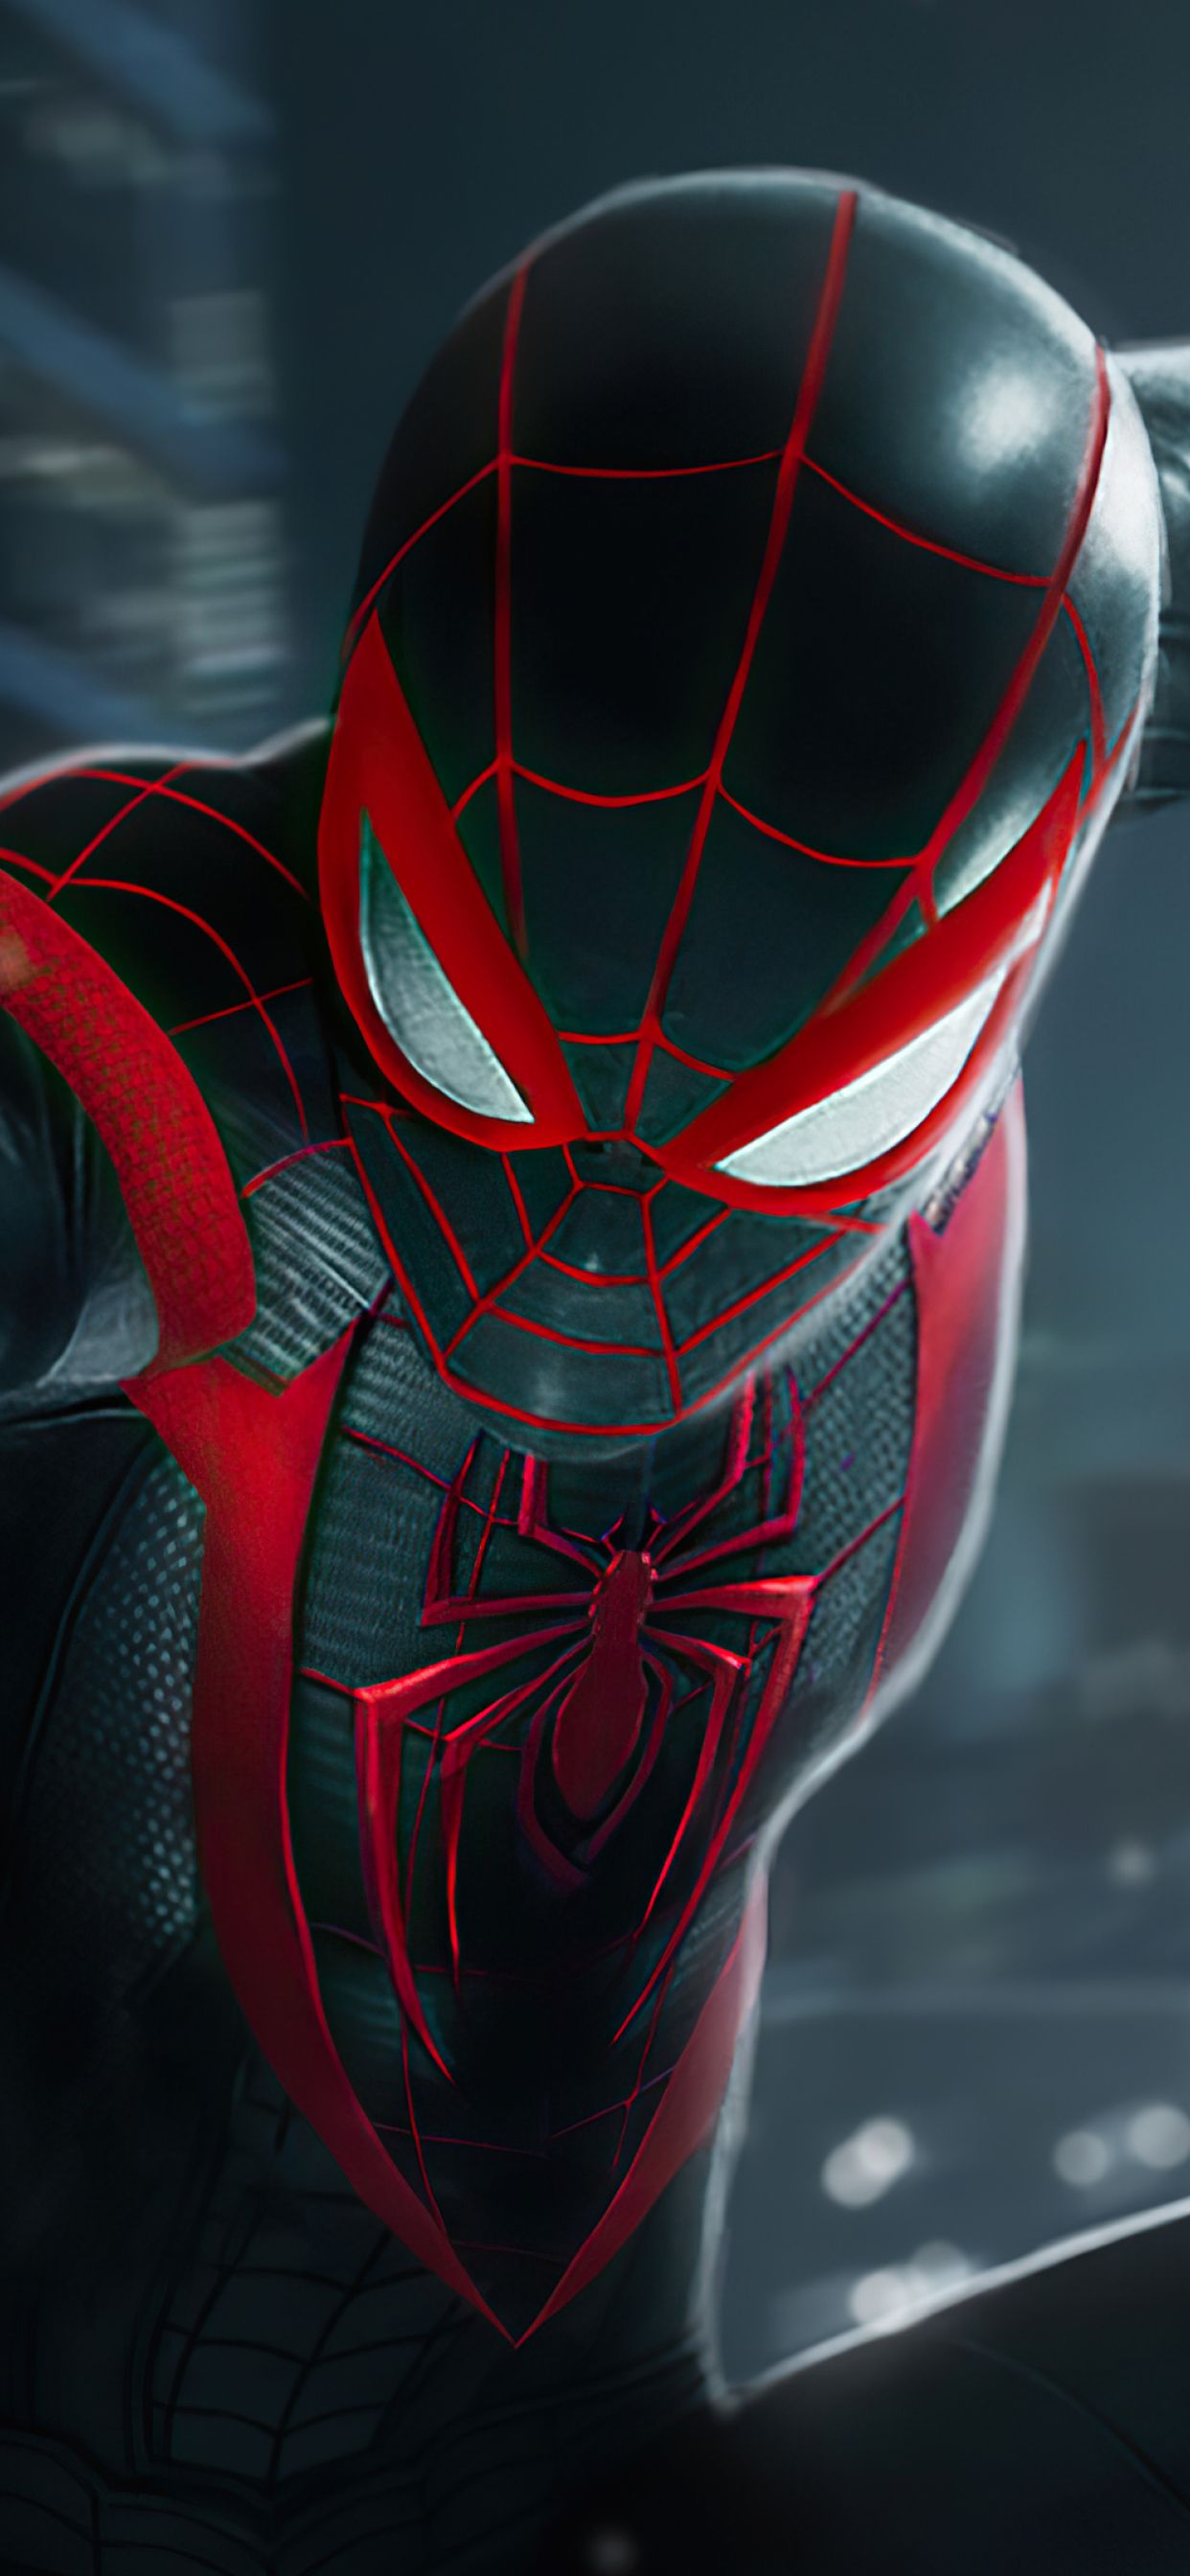 Miles Morales Suits Wallpapers Wallpaper Cave Tons of awesome miles morales android wallpapers to download for free. miles morales suits wallpapers